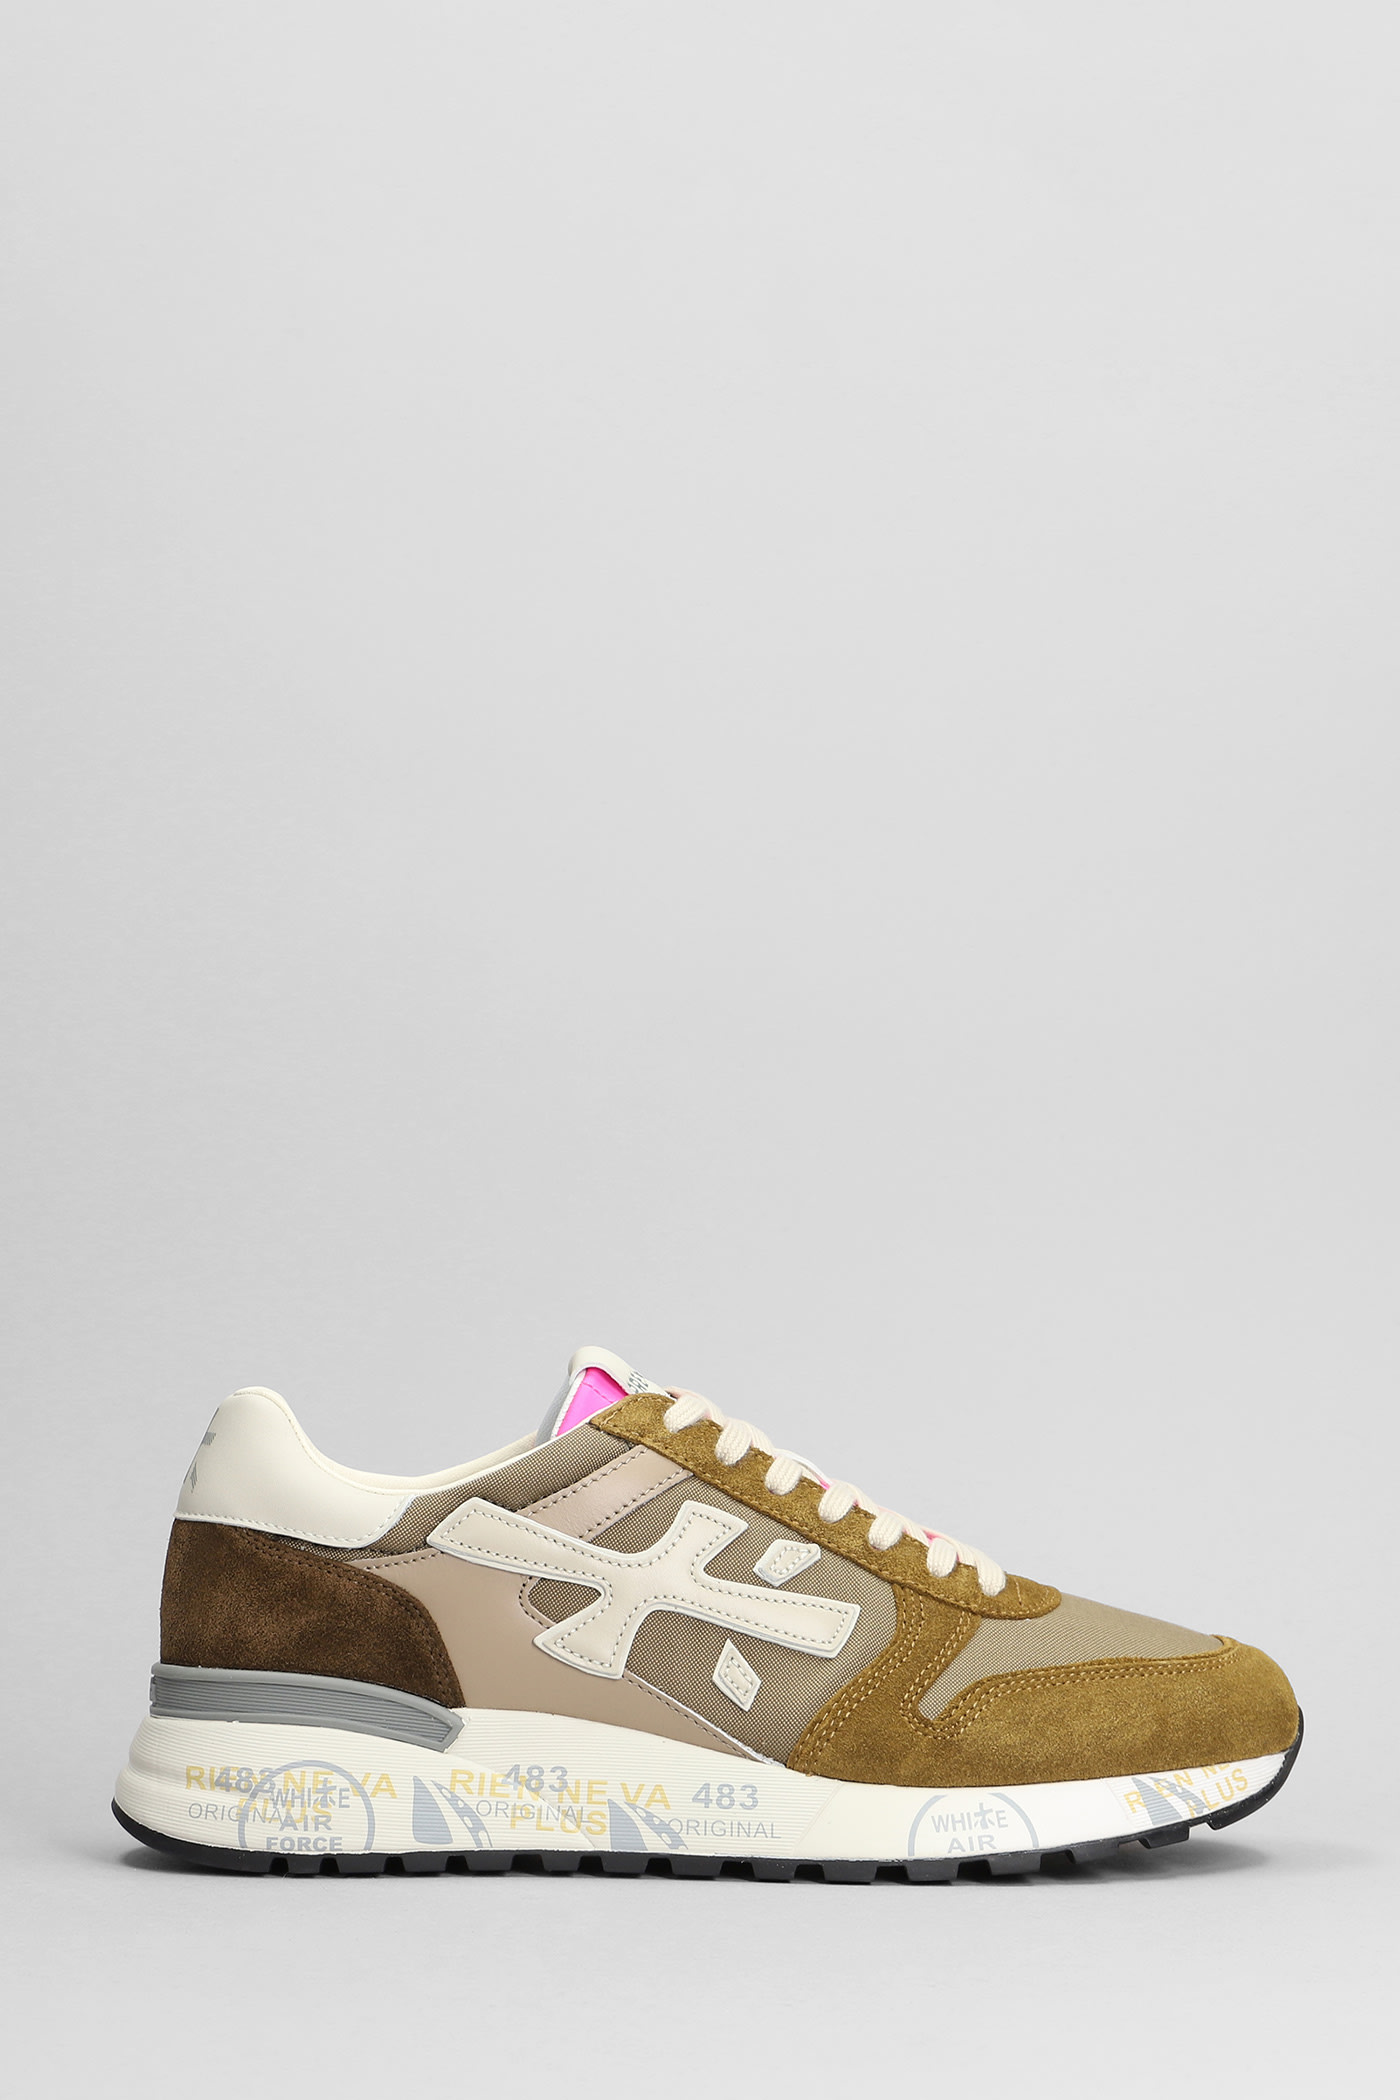 Premiata Mick Sneakers In Leather Color Suede And Fabric